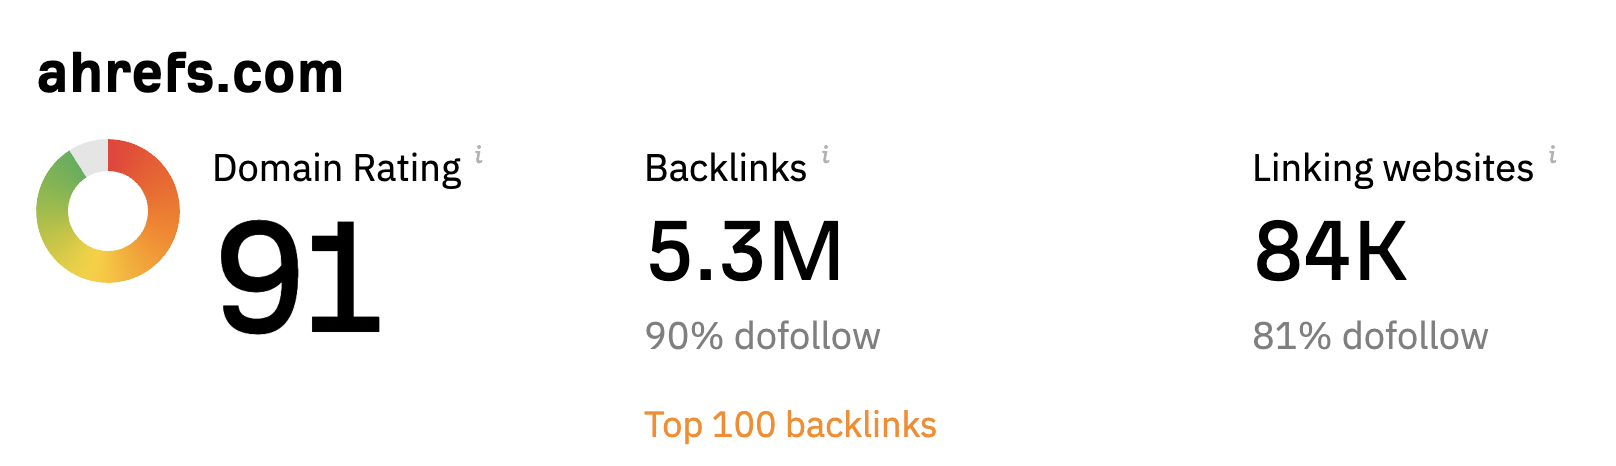 A screenshot showing the number of backlinks to ahrefs.com